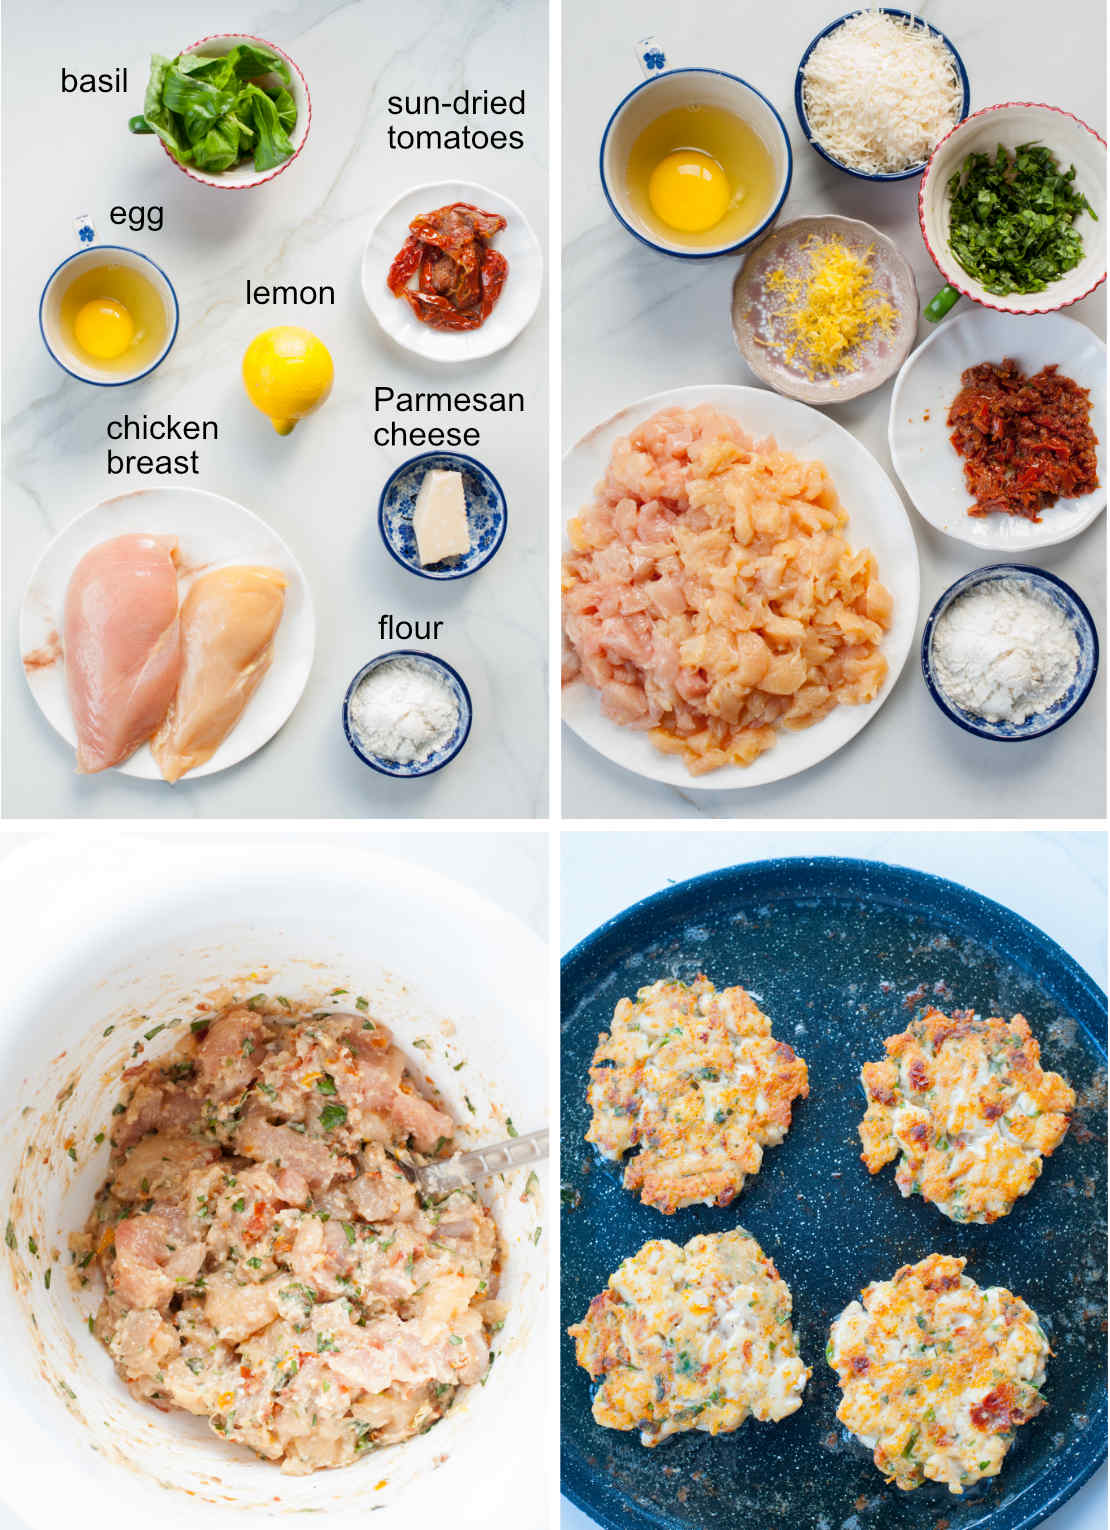 Italian-inspired chicken fritters ingredients and preparation steps